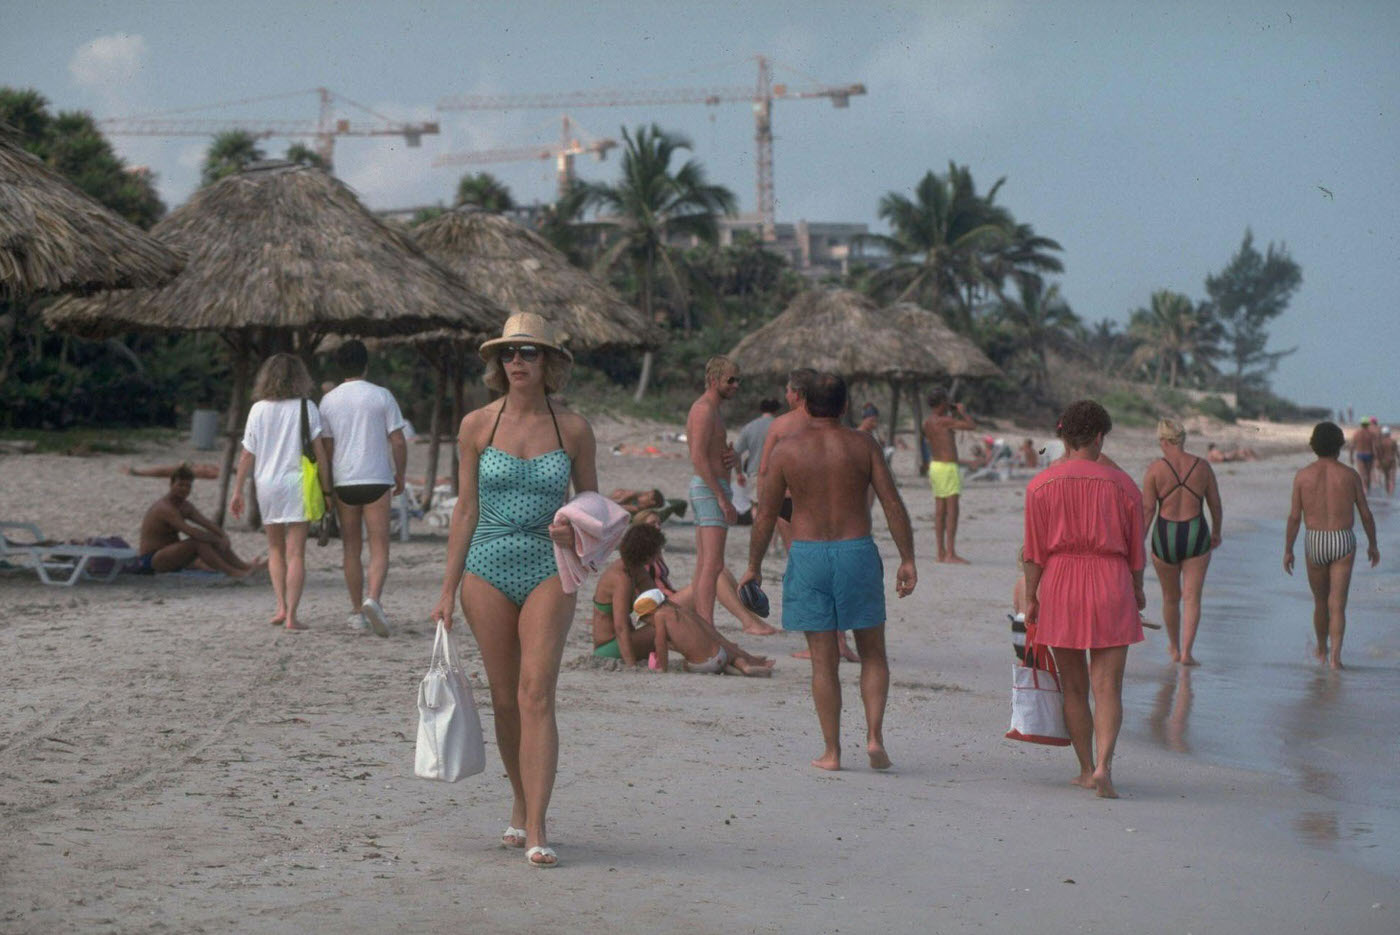 Tourists sunbathing and strolling on the beach in Varadero, Cuba.